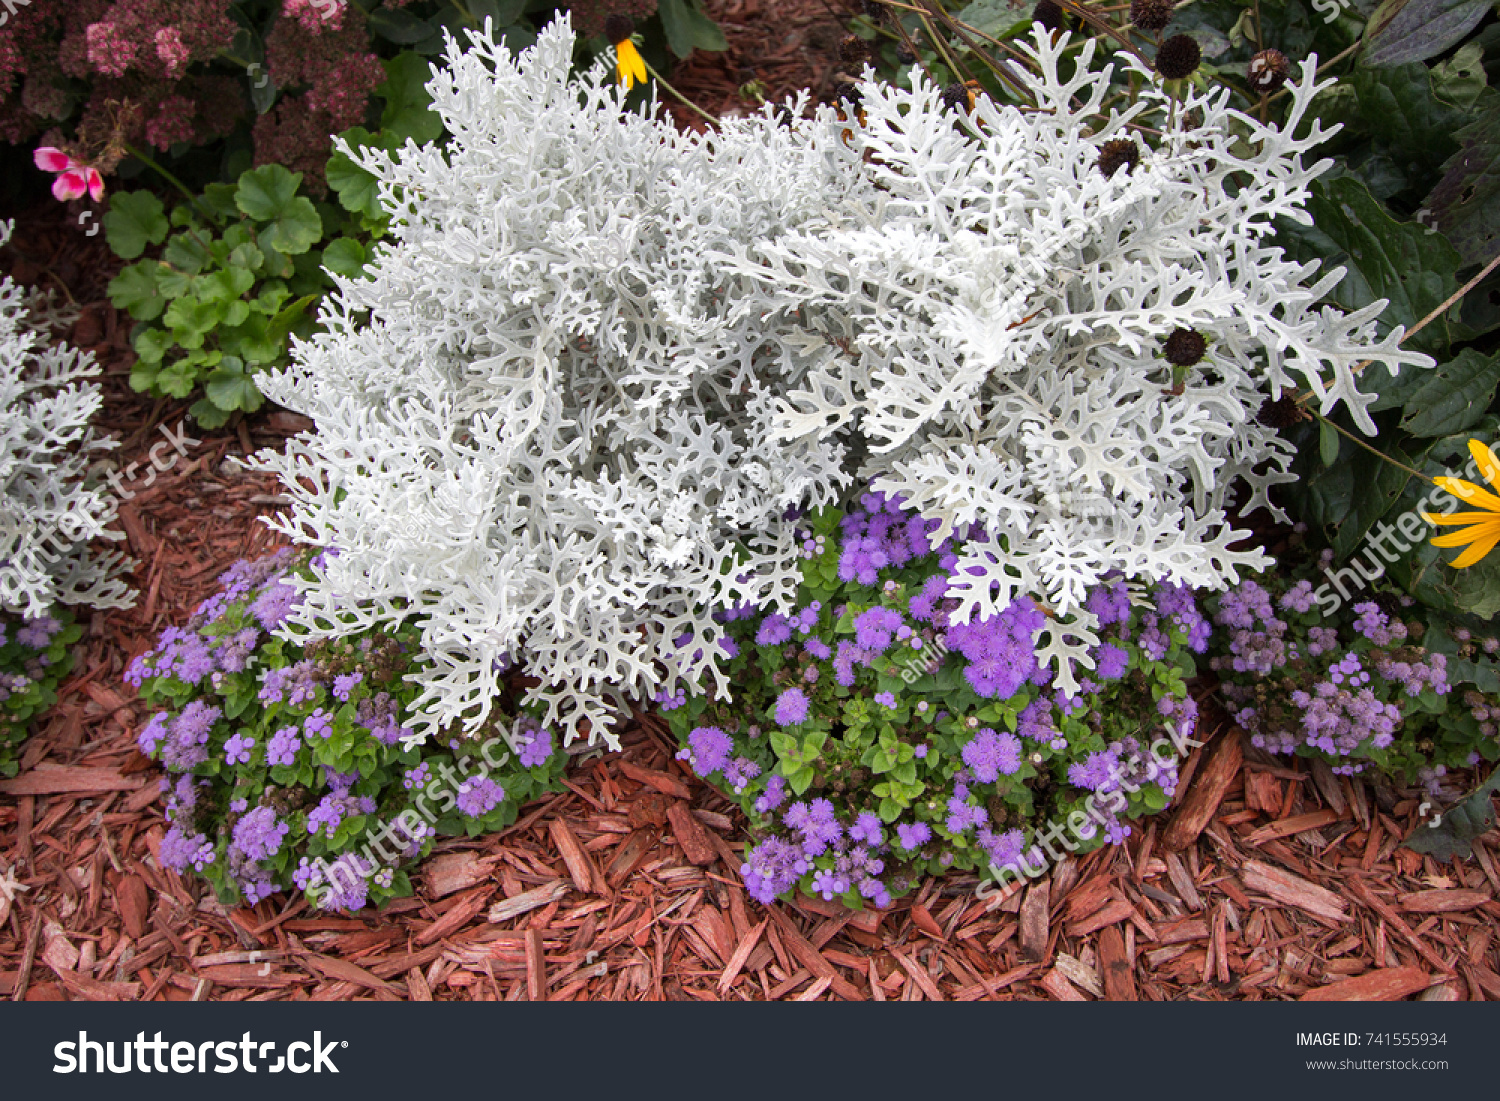 Summer Garden Annuals Background. Dusty Miller plant surrounded by colorful annuals. Dusty Miller is a hardy shade annual that is deer and pest resistant. #741555934